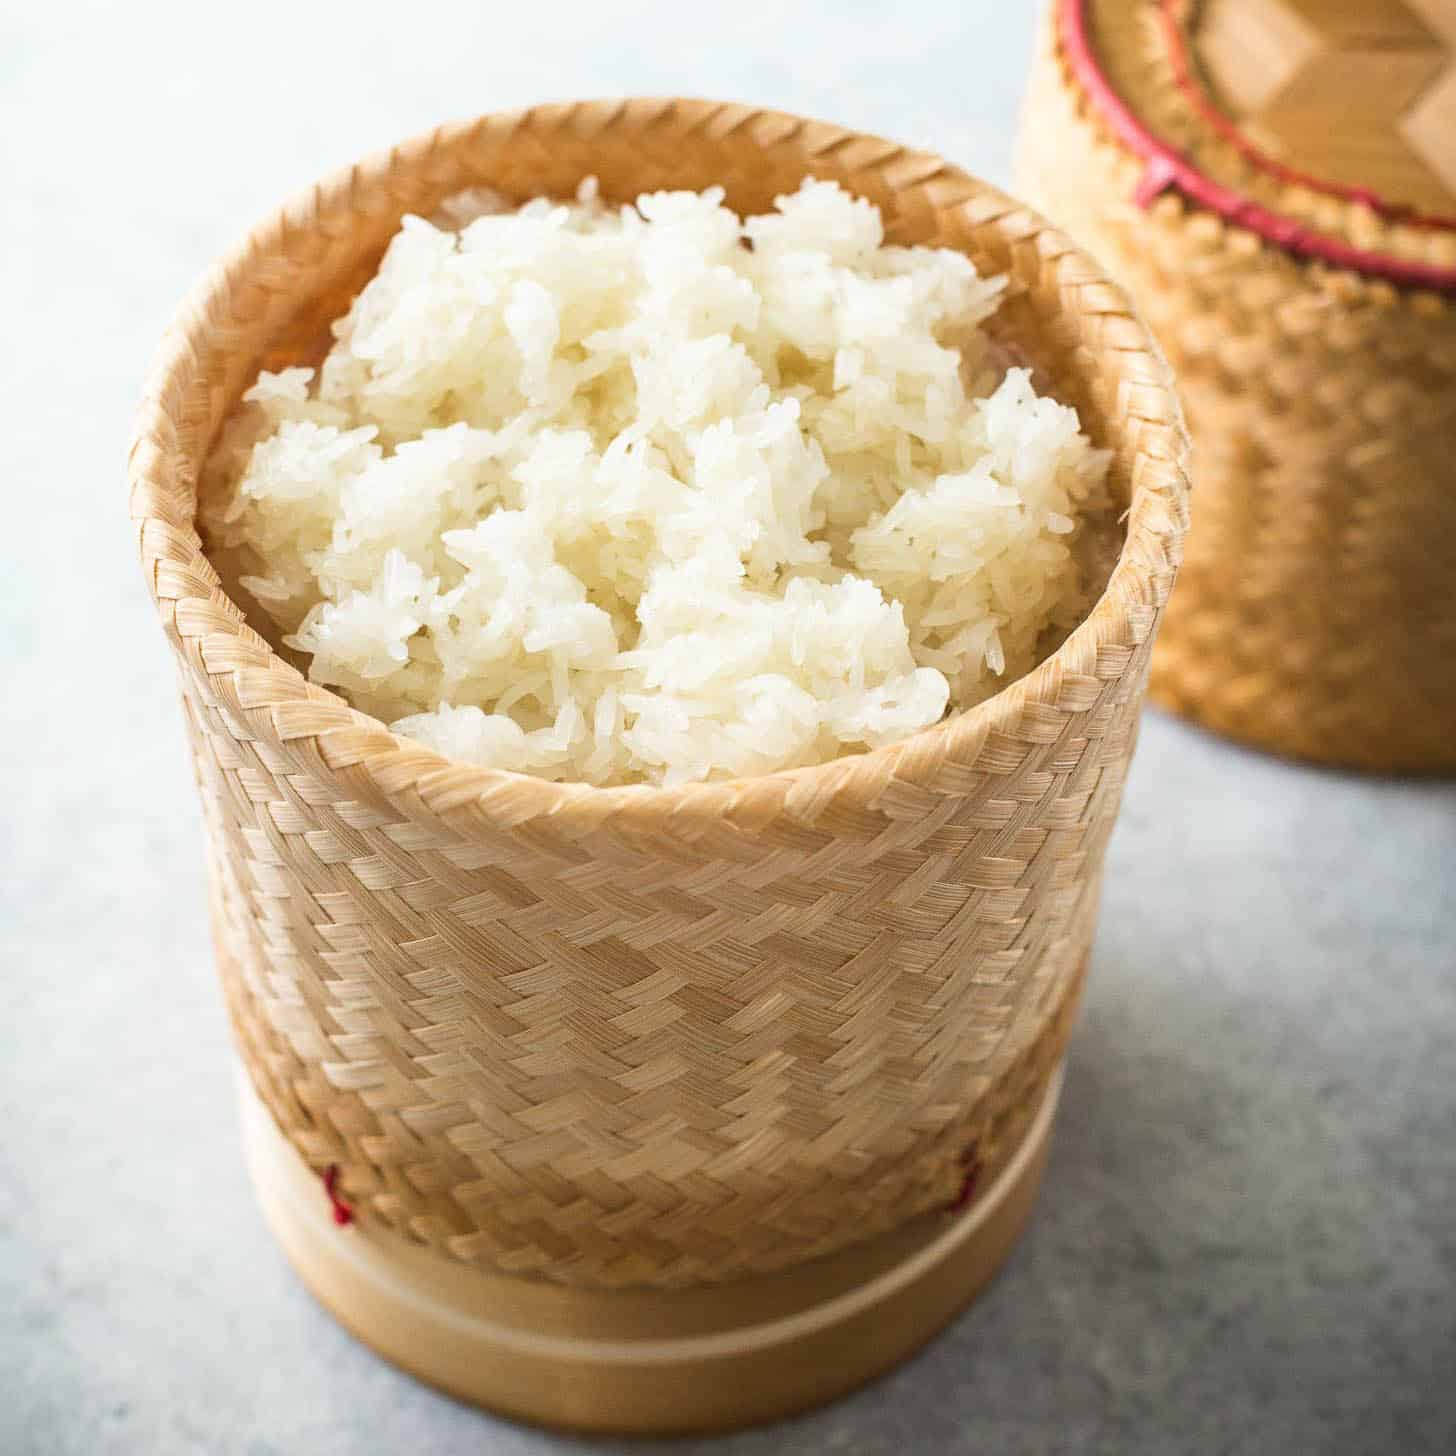 What happens if you boil sticky rice?